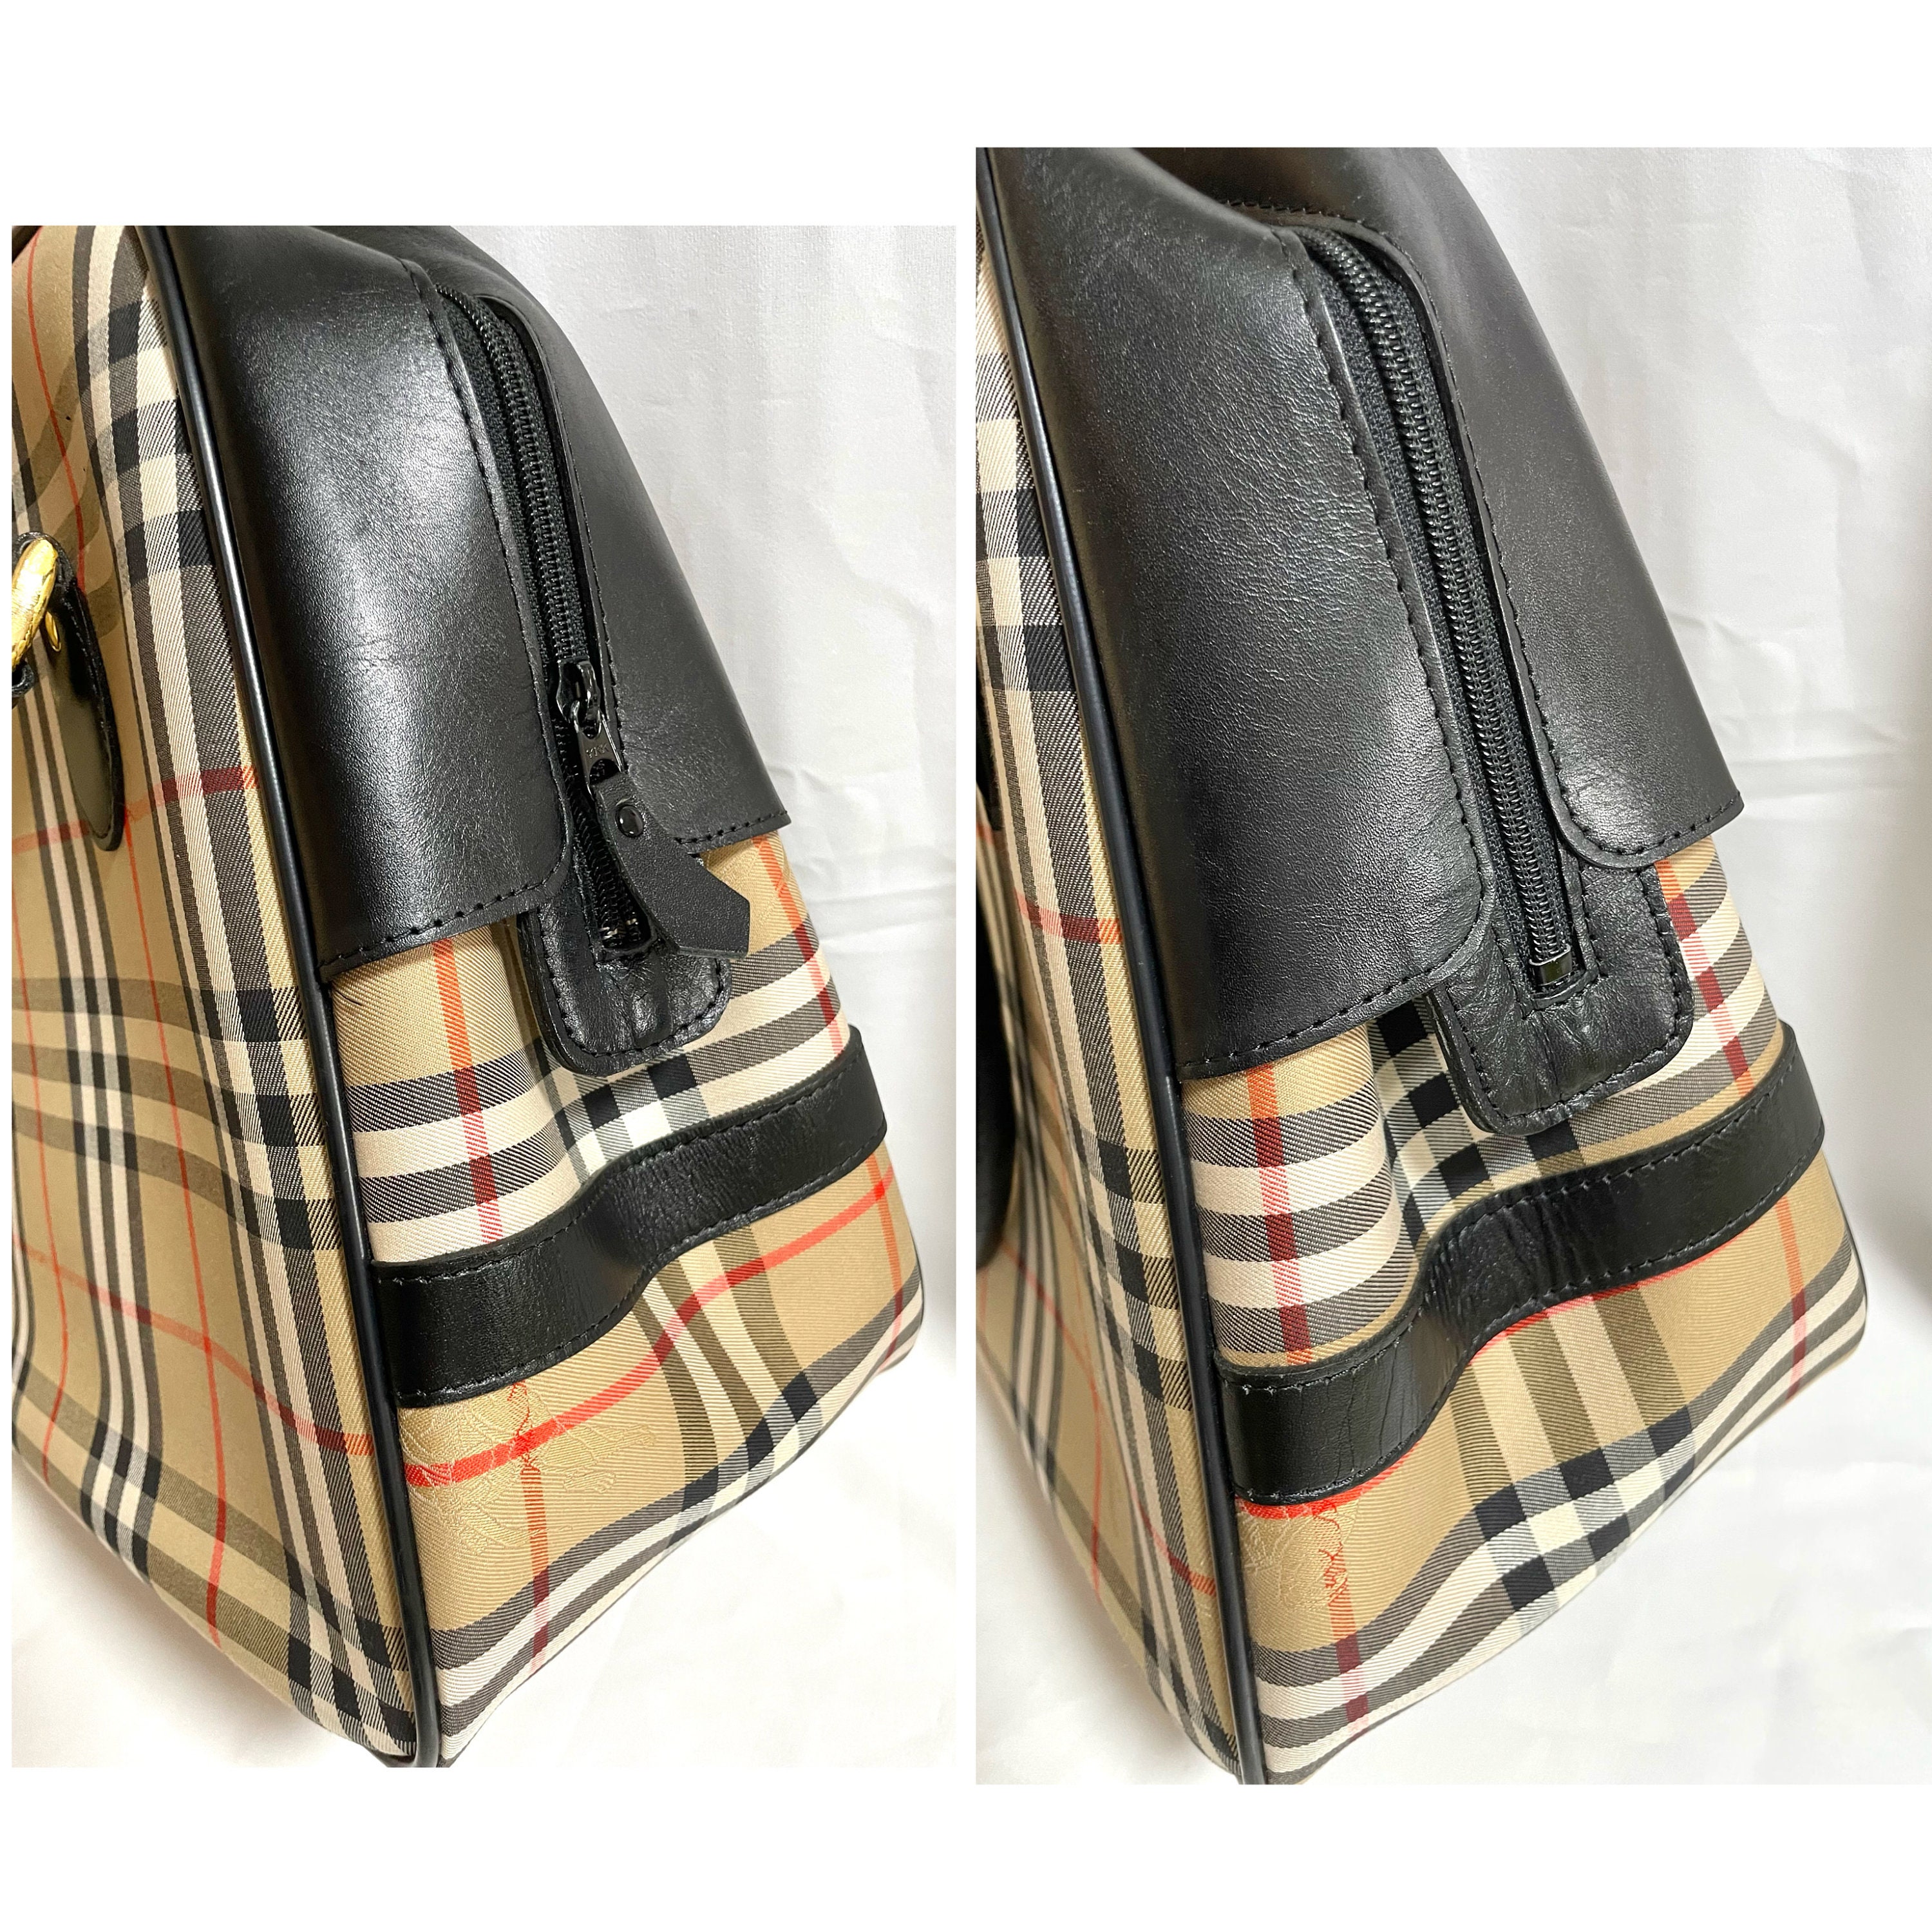 Burberry Shoulder Bag In Nylon And Leather